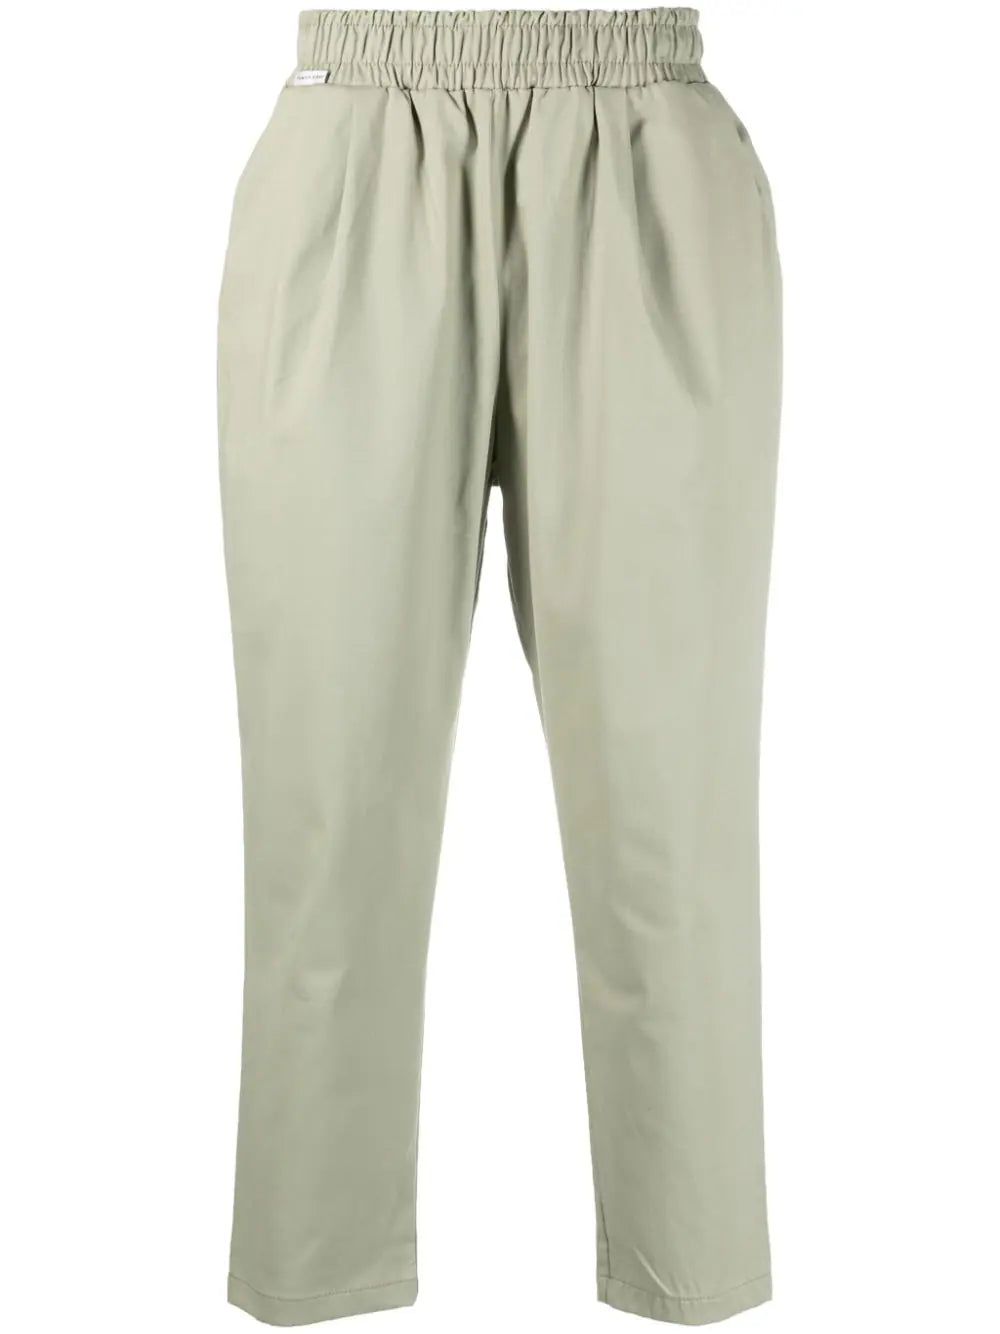 Tapered chino casual trousers - green